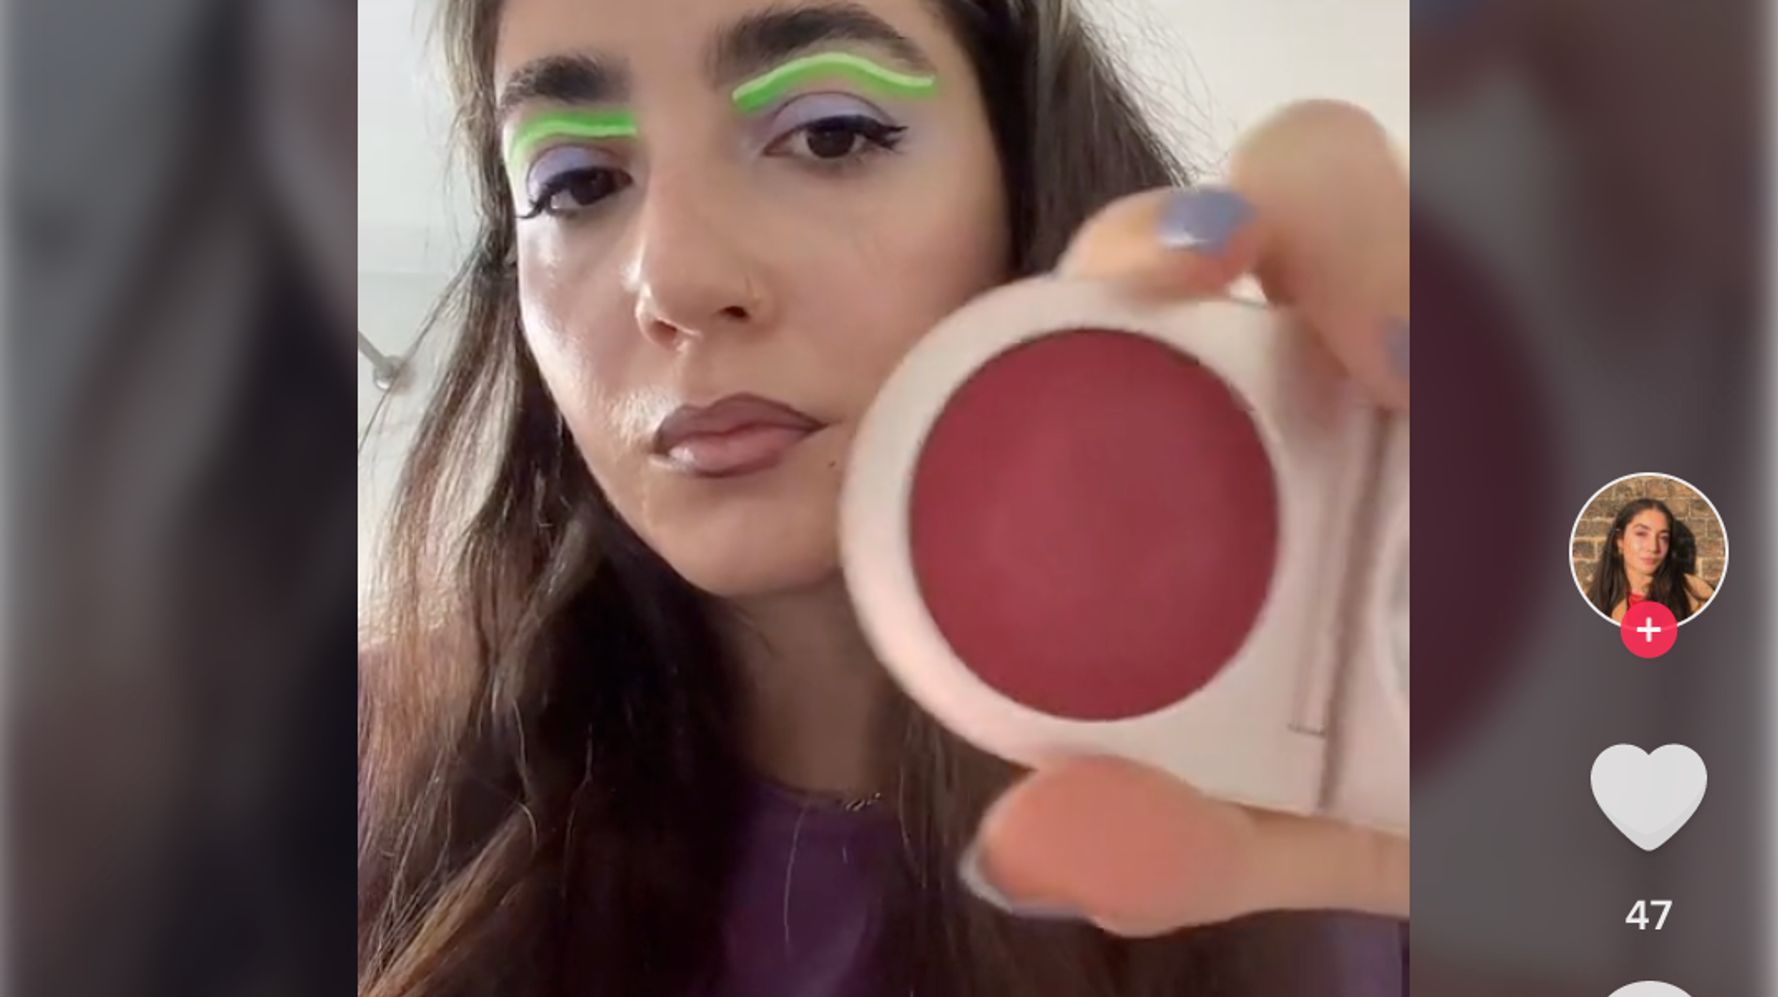 We Tried 20 TikTok Makeup And Beauty Hacks To See If They Work ...